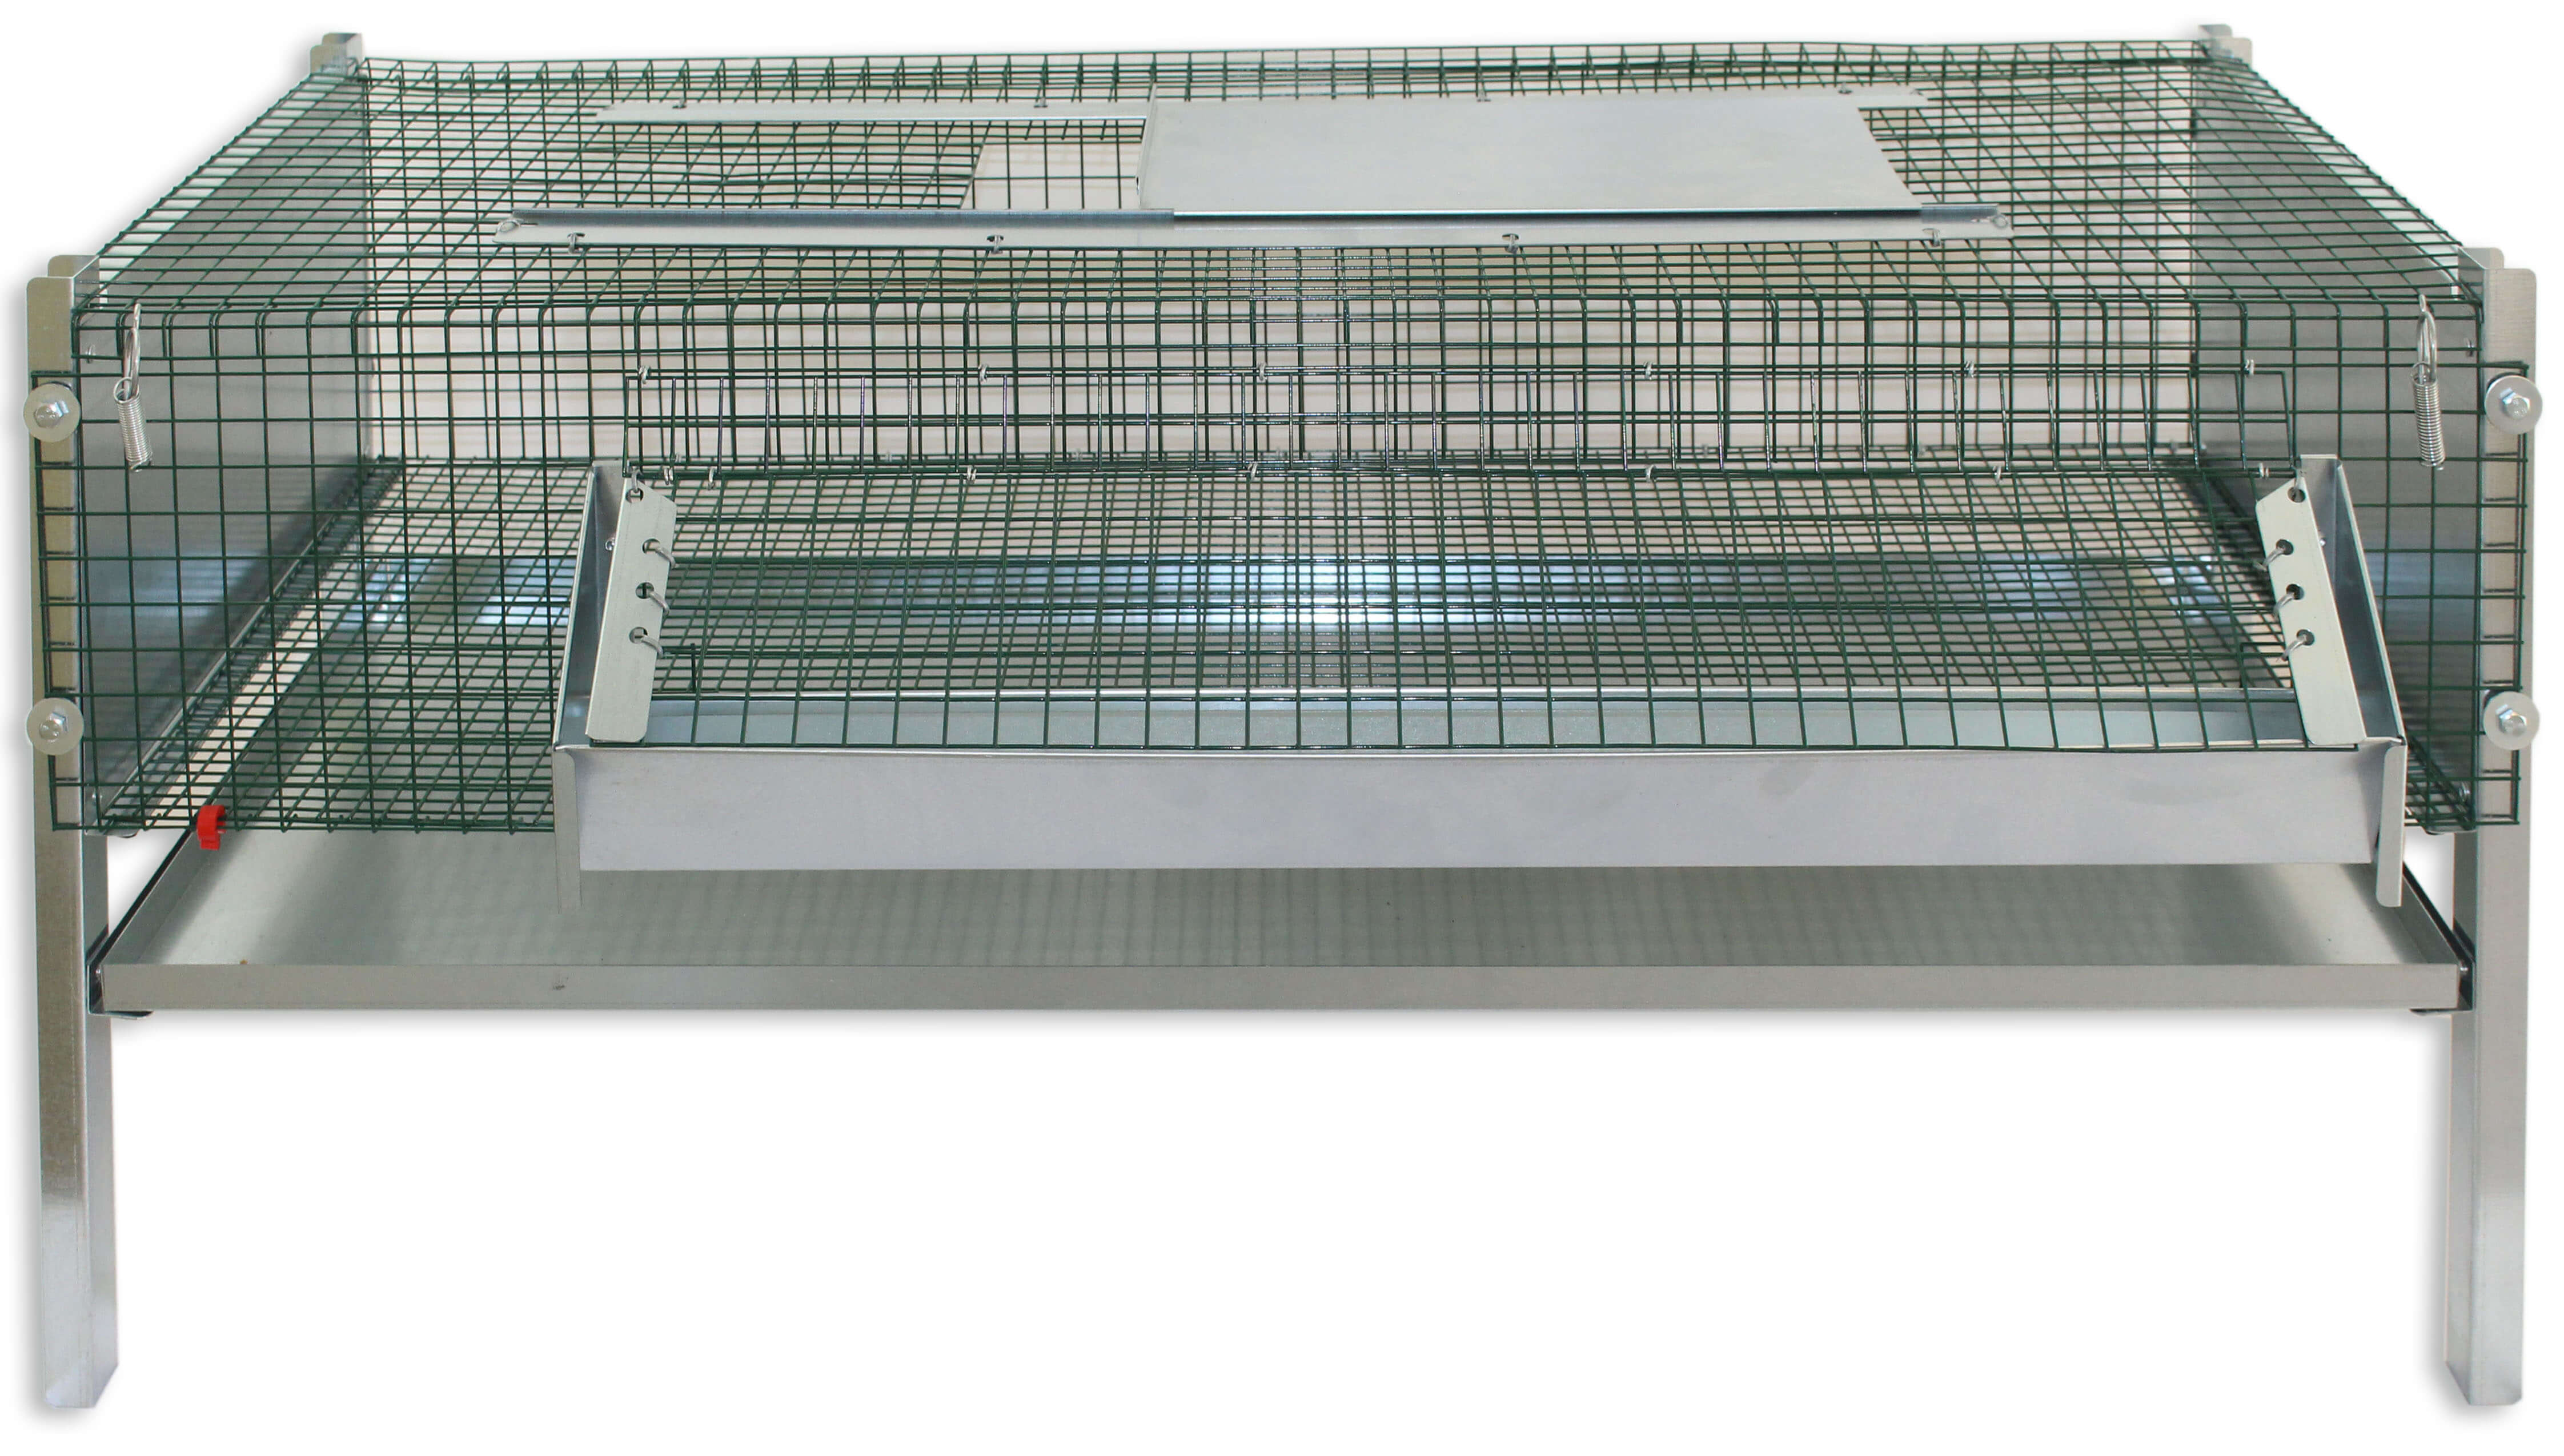 Quail-Cage, metal (for Laying-Quails or Fattening-Quails)